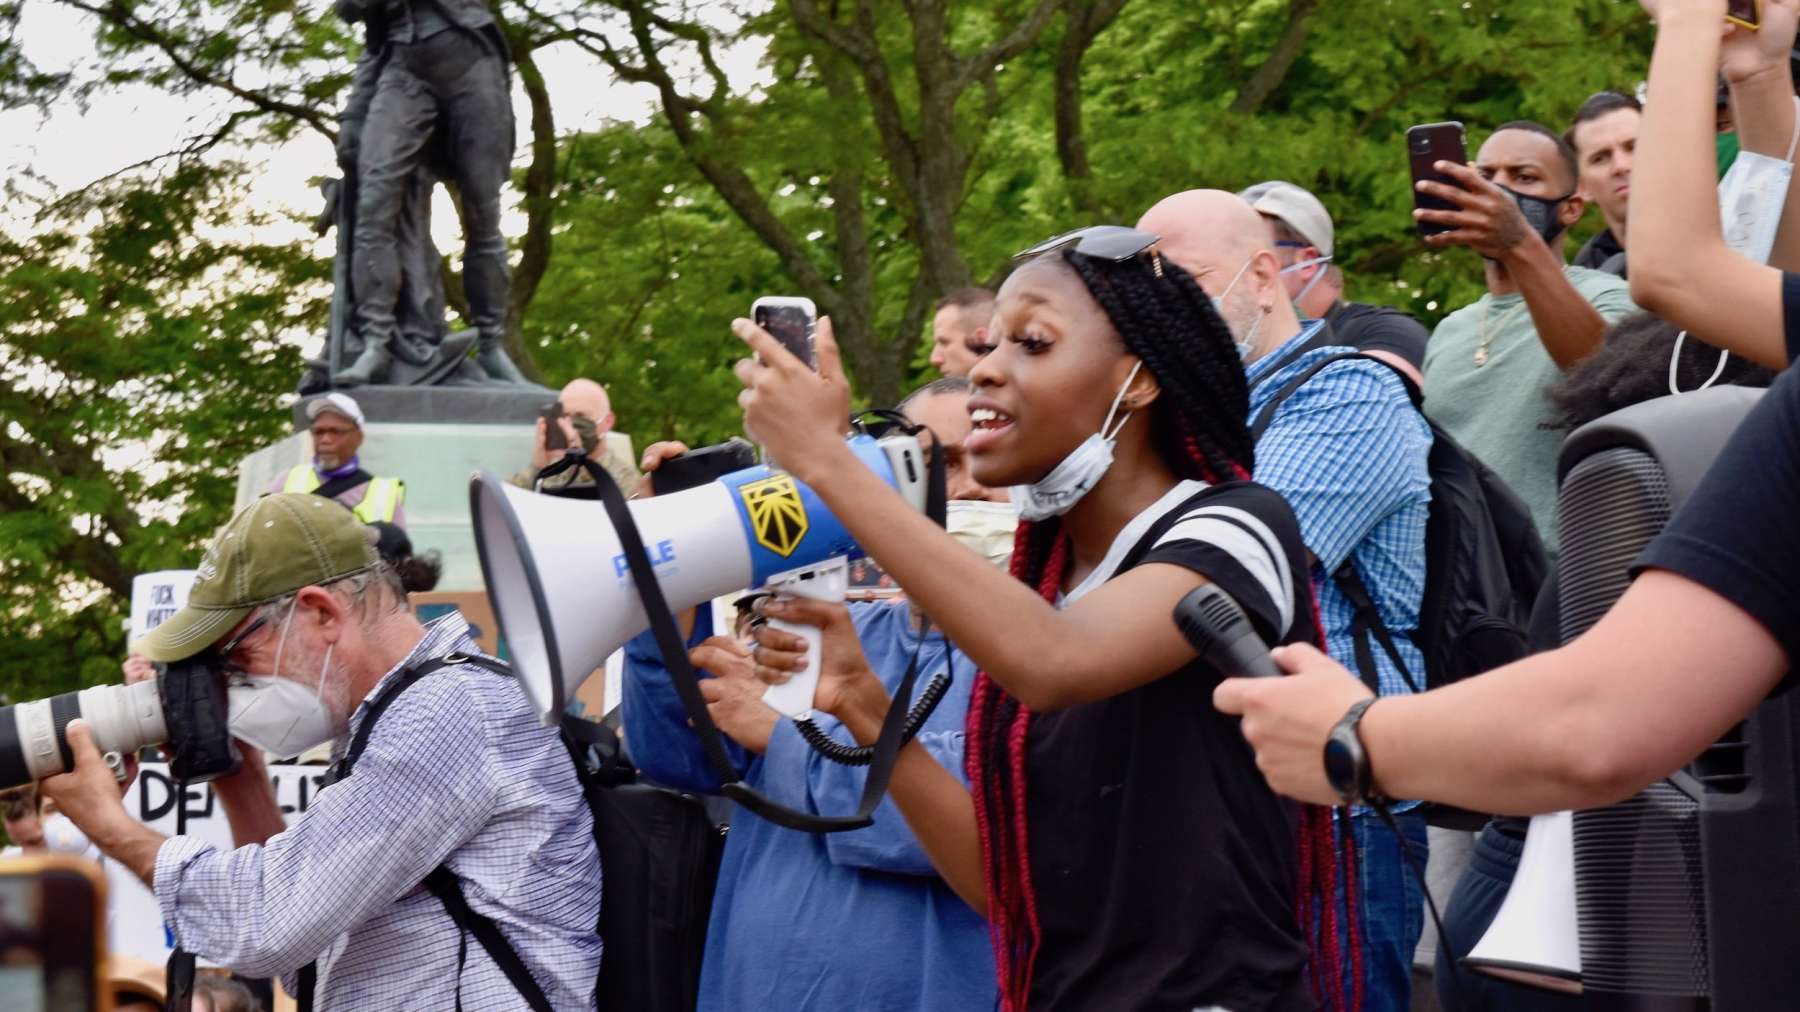 Rhode Island News: Photos from the youth led Protect Black Lives protest